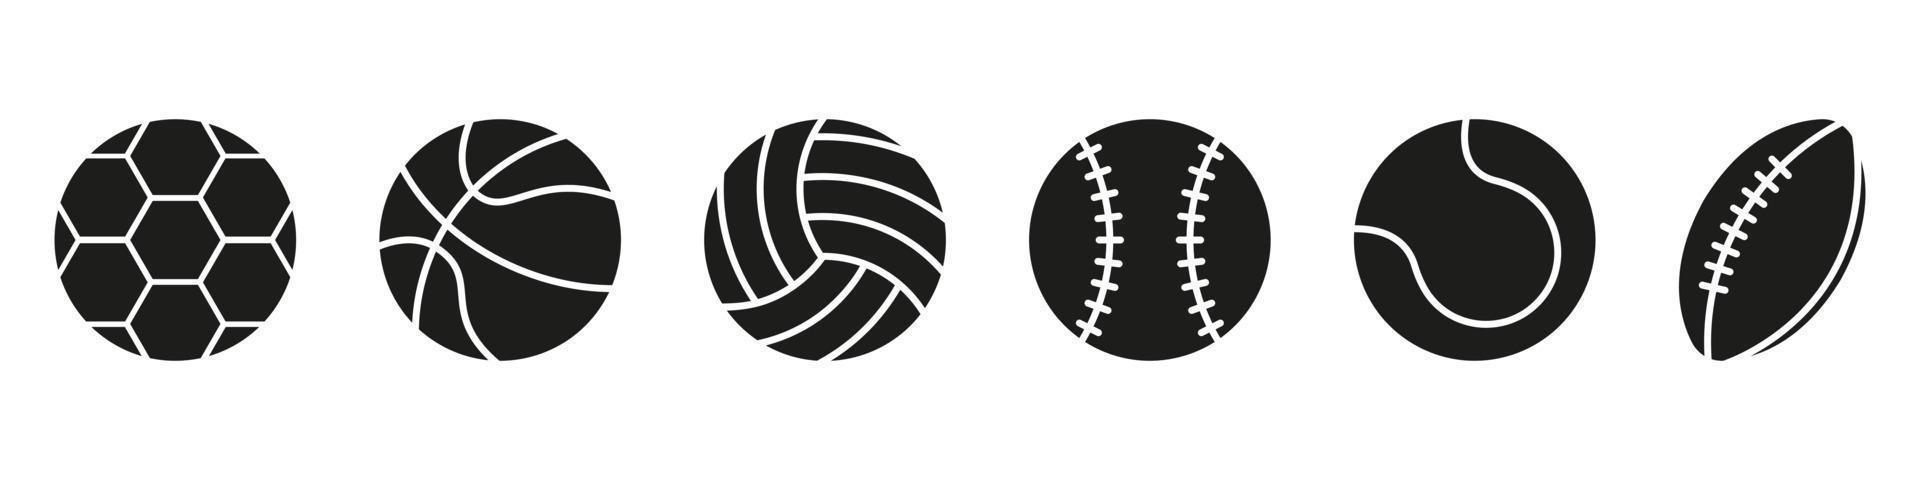 Set of Sport Game Balls Silhouette Icon. Collection of Balls for Basketball, Baseball, Tennis, Rugby, Soccer, Volleyball Black Pictogram. Isolated Vector Illustration.